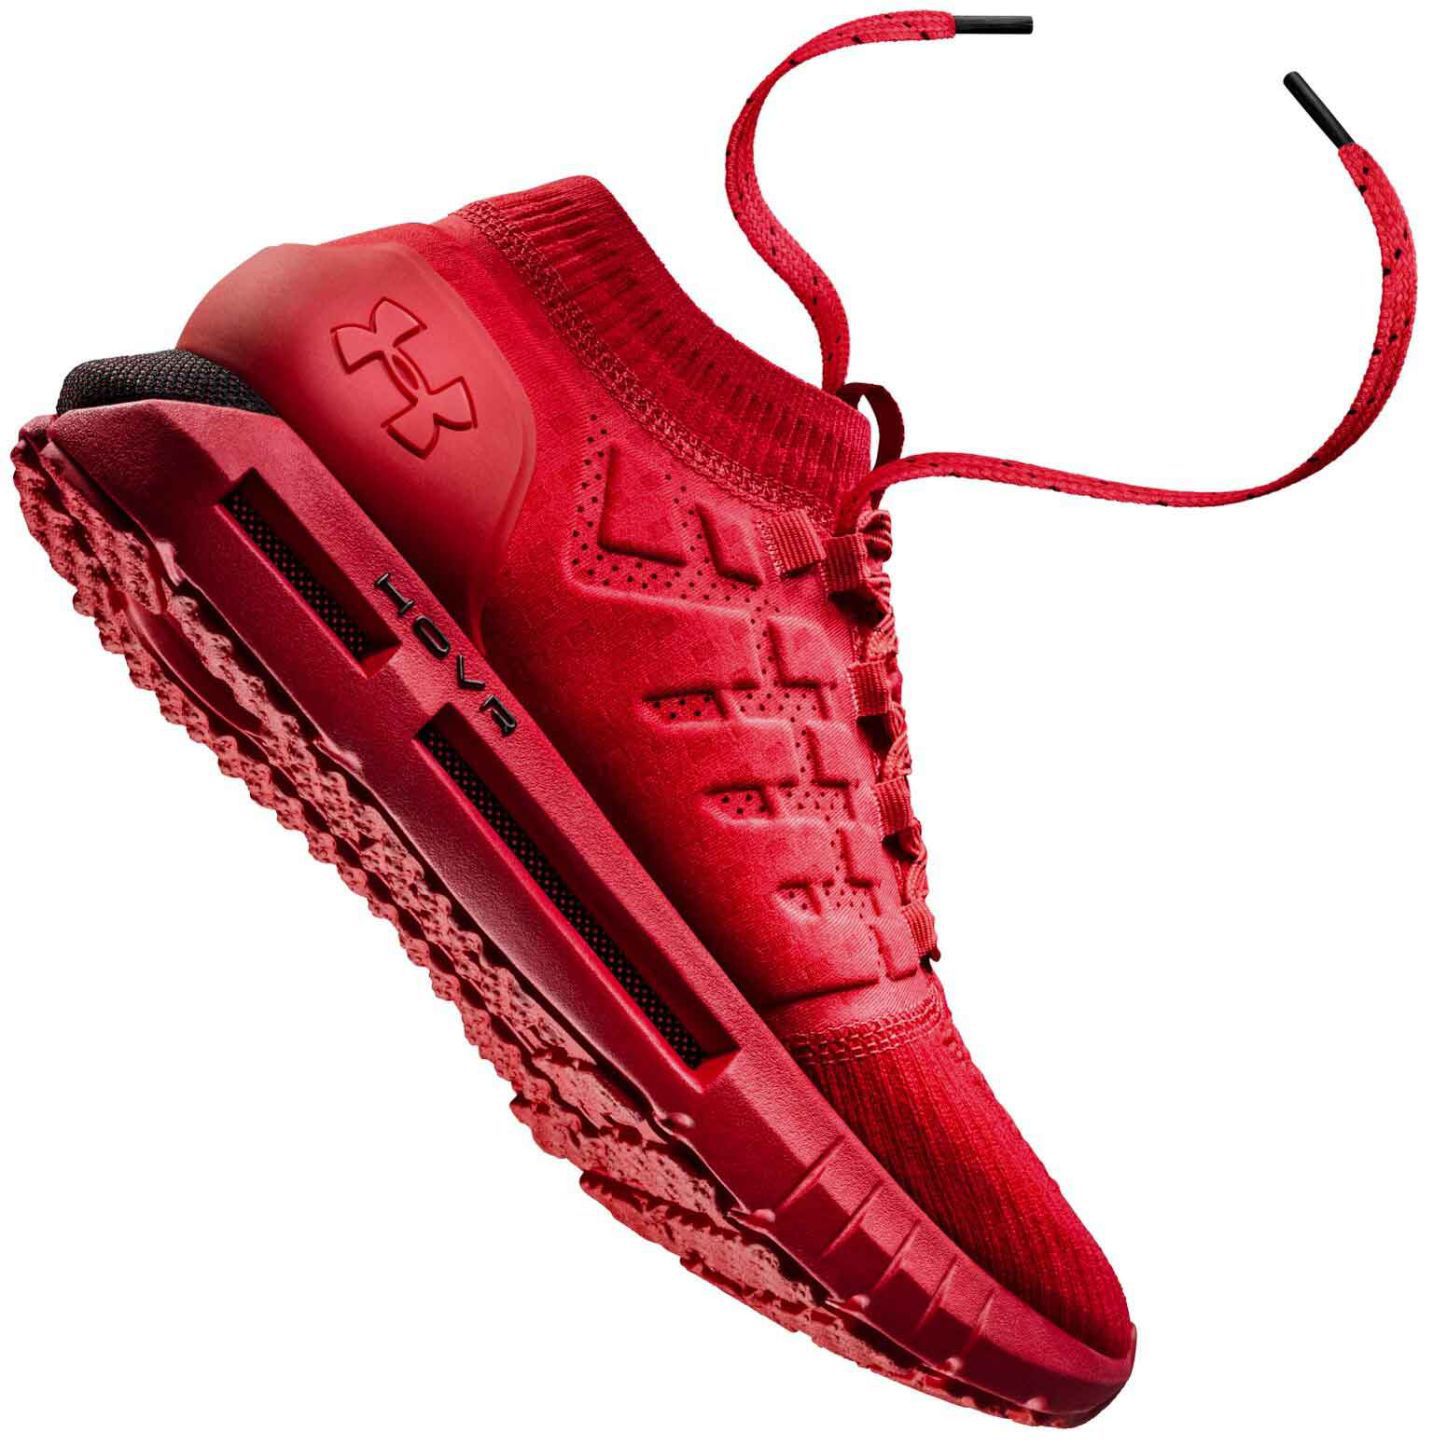 under armour trainers hovr